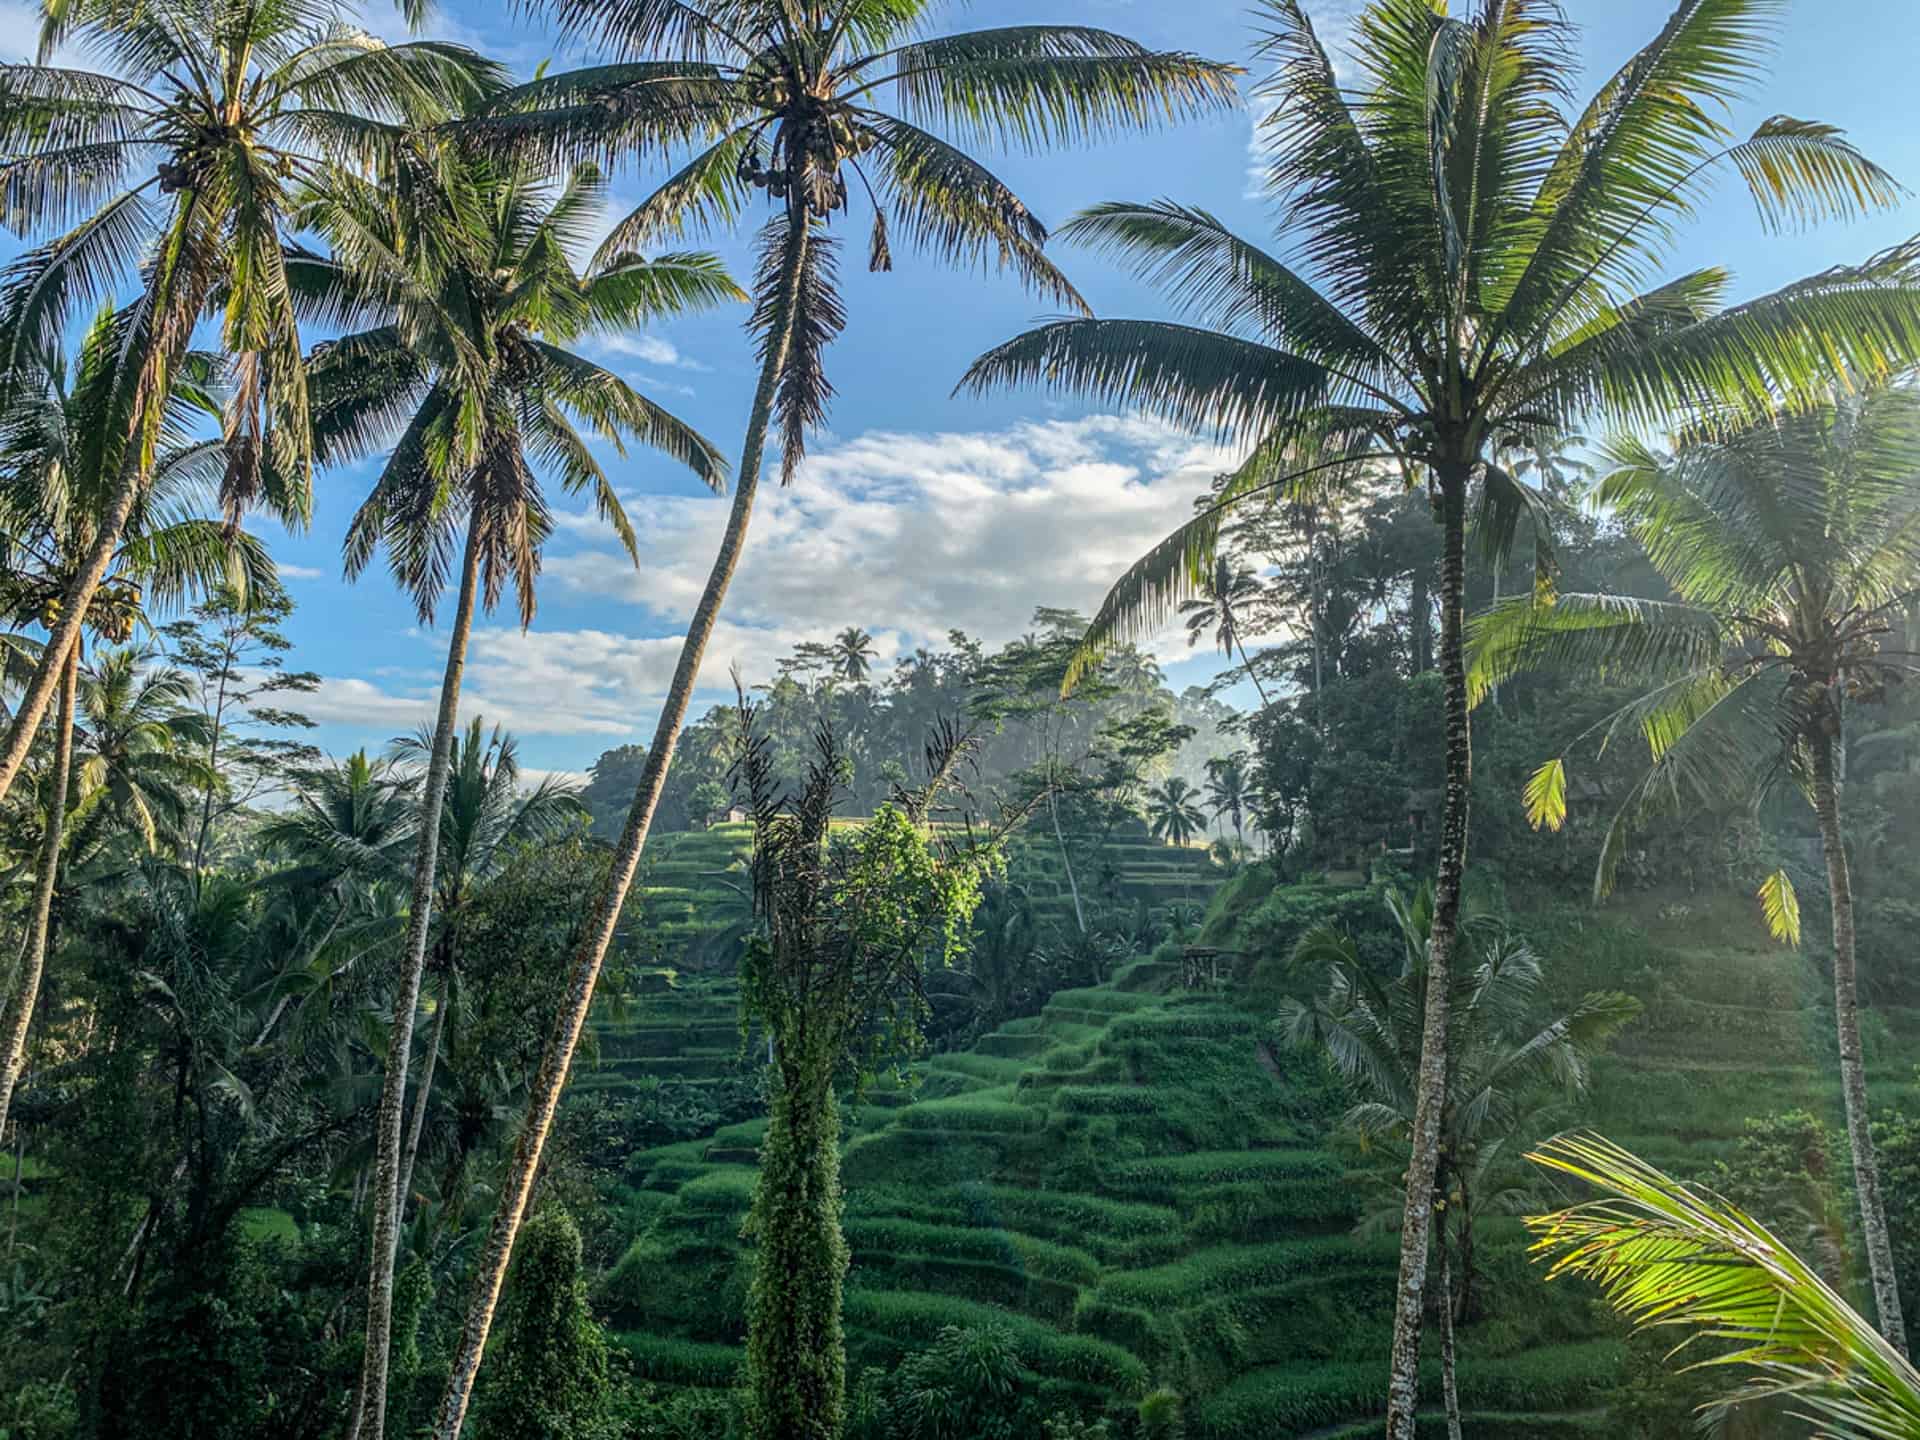 Tegalalang Rice Terrace early in the morning with palm trees in the foreground. Ubud,Bali,Indonesia